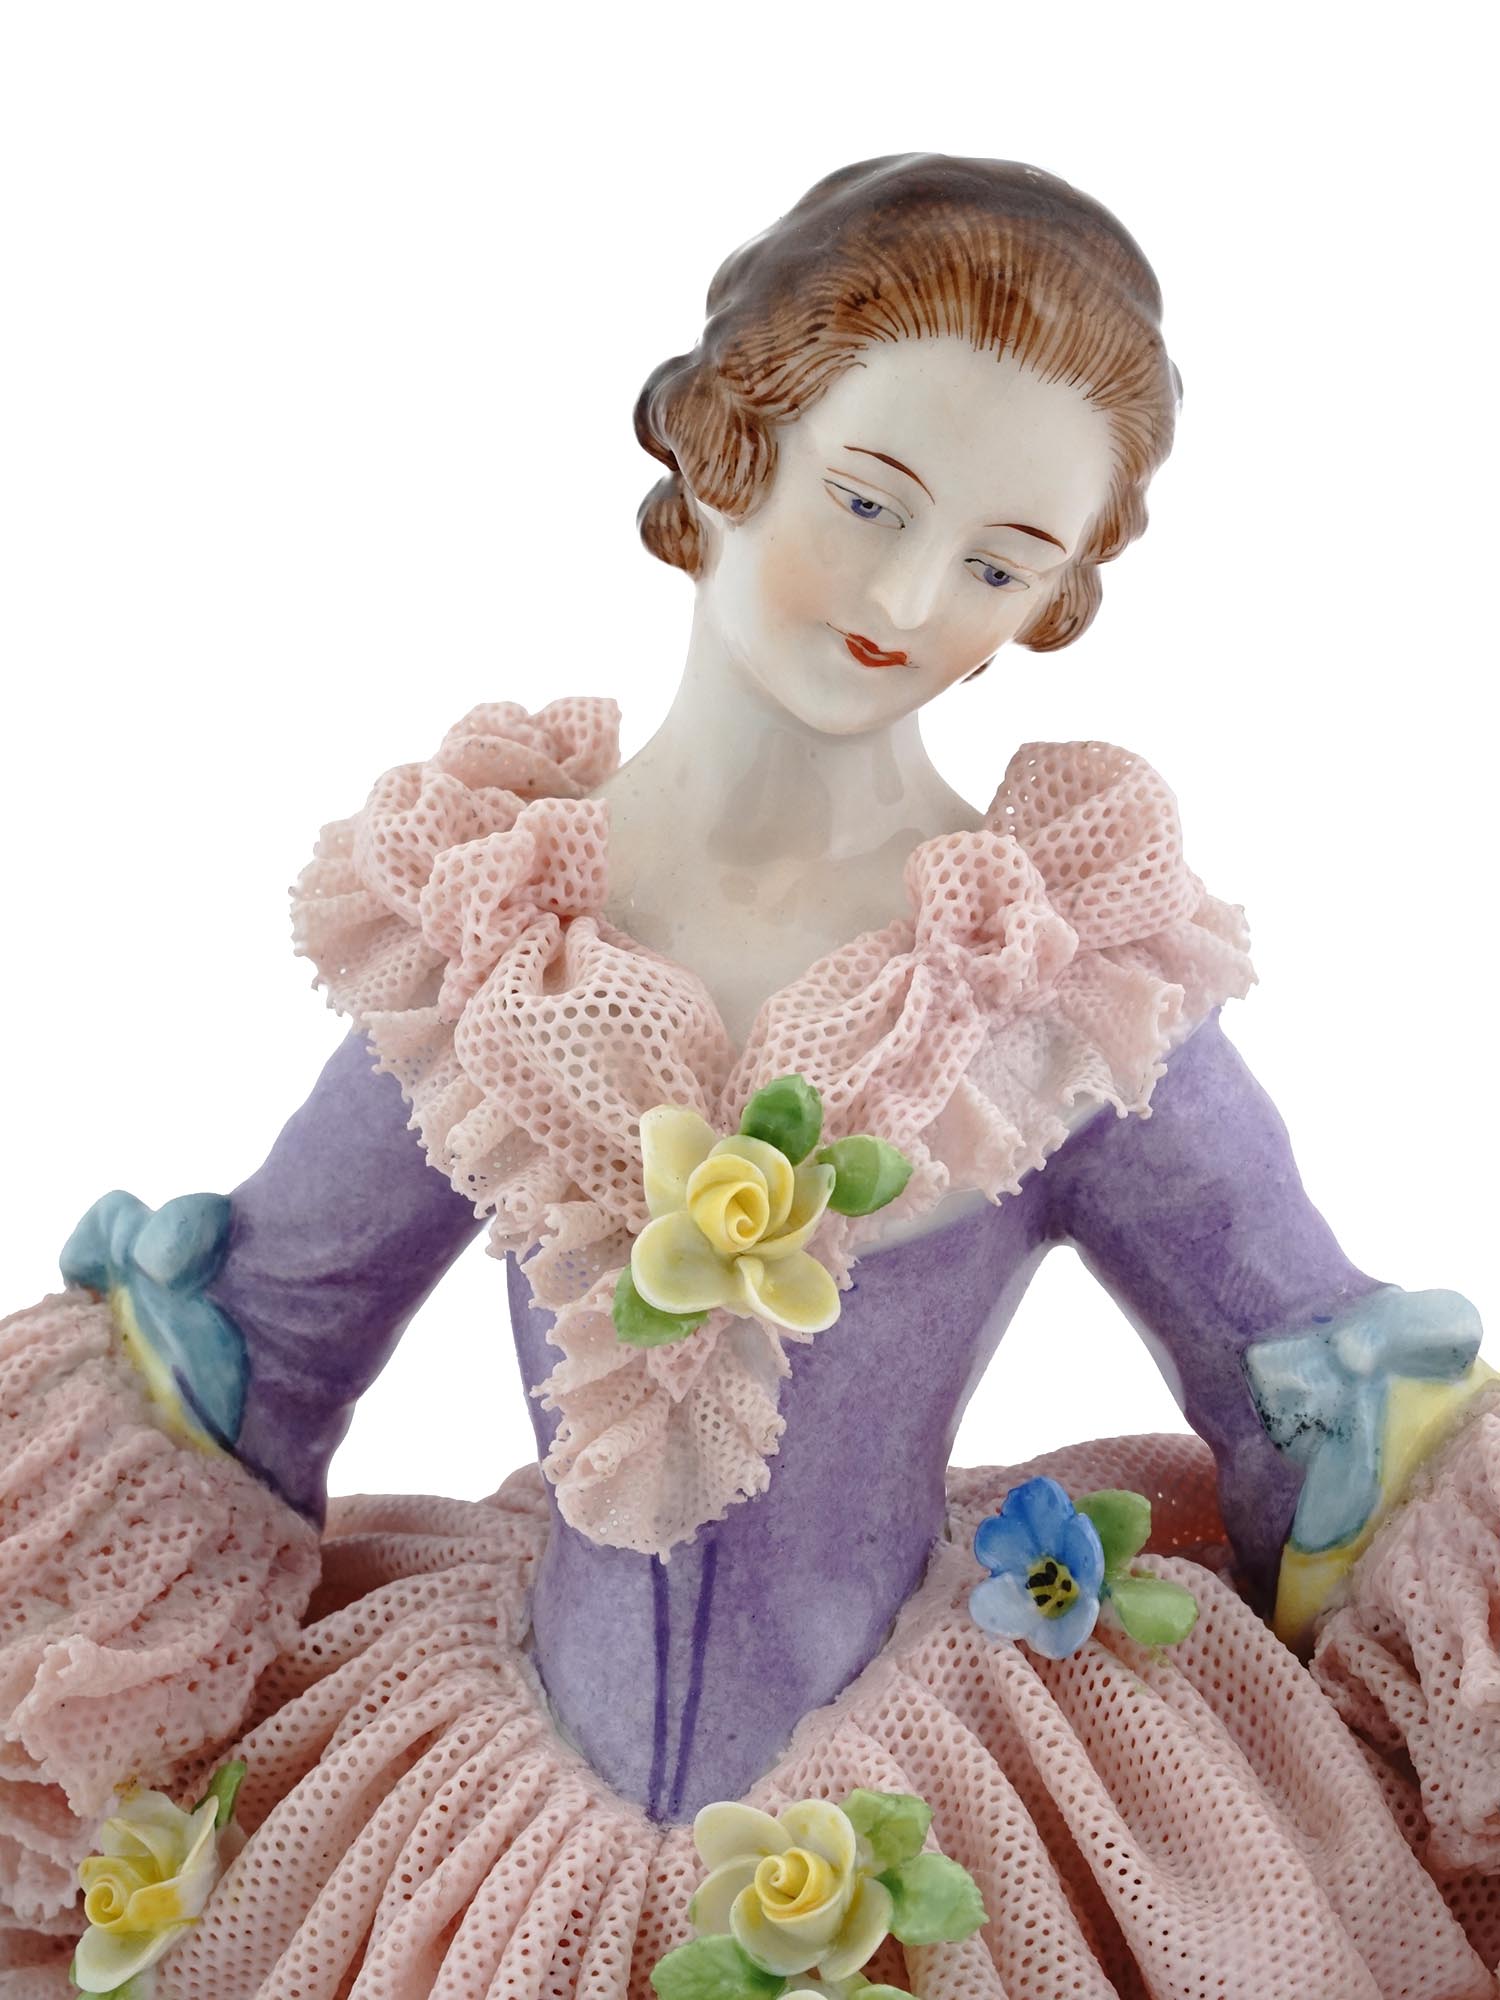 LARGE DRESDEN LACE PORCELAIN FIGURINE BY MULLER VOLKSTEDT PIC-5